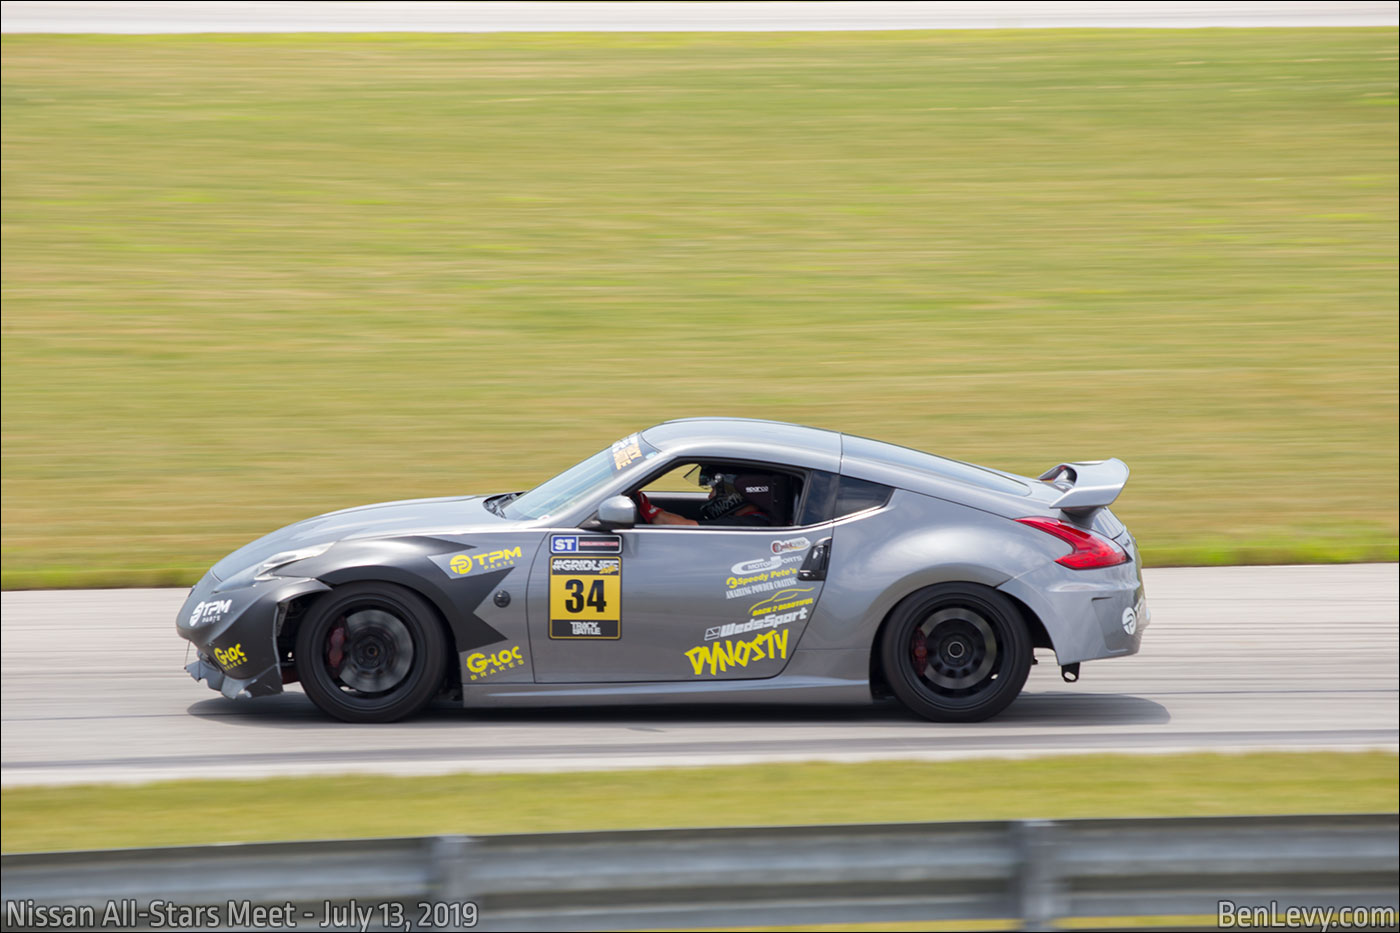 Silver Nissan 350Z on the track